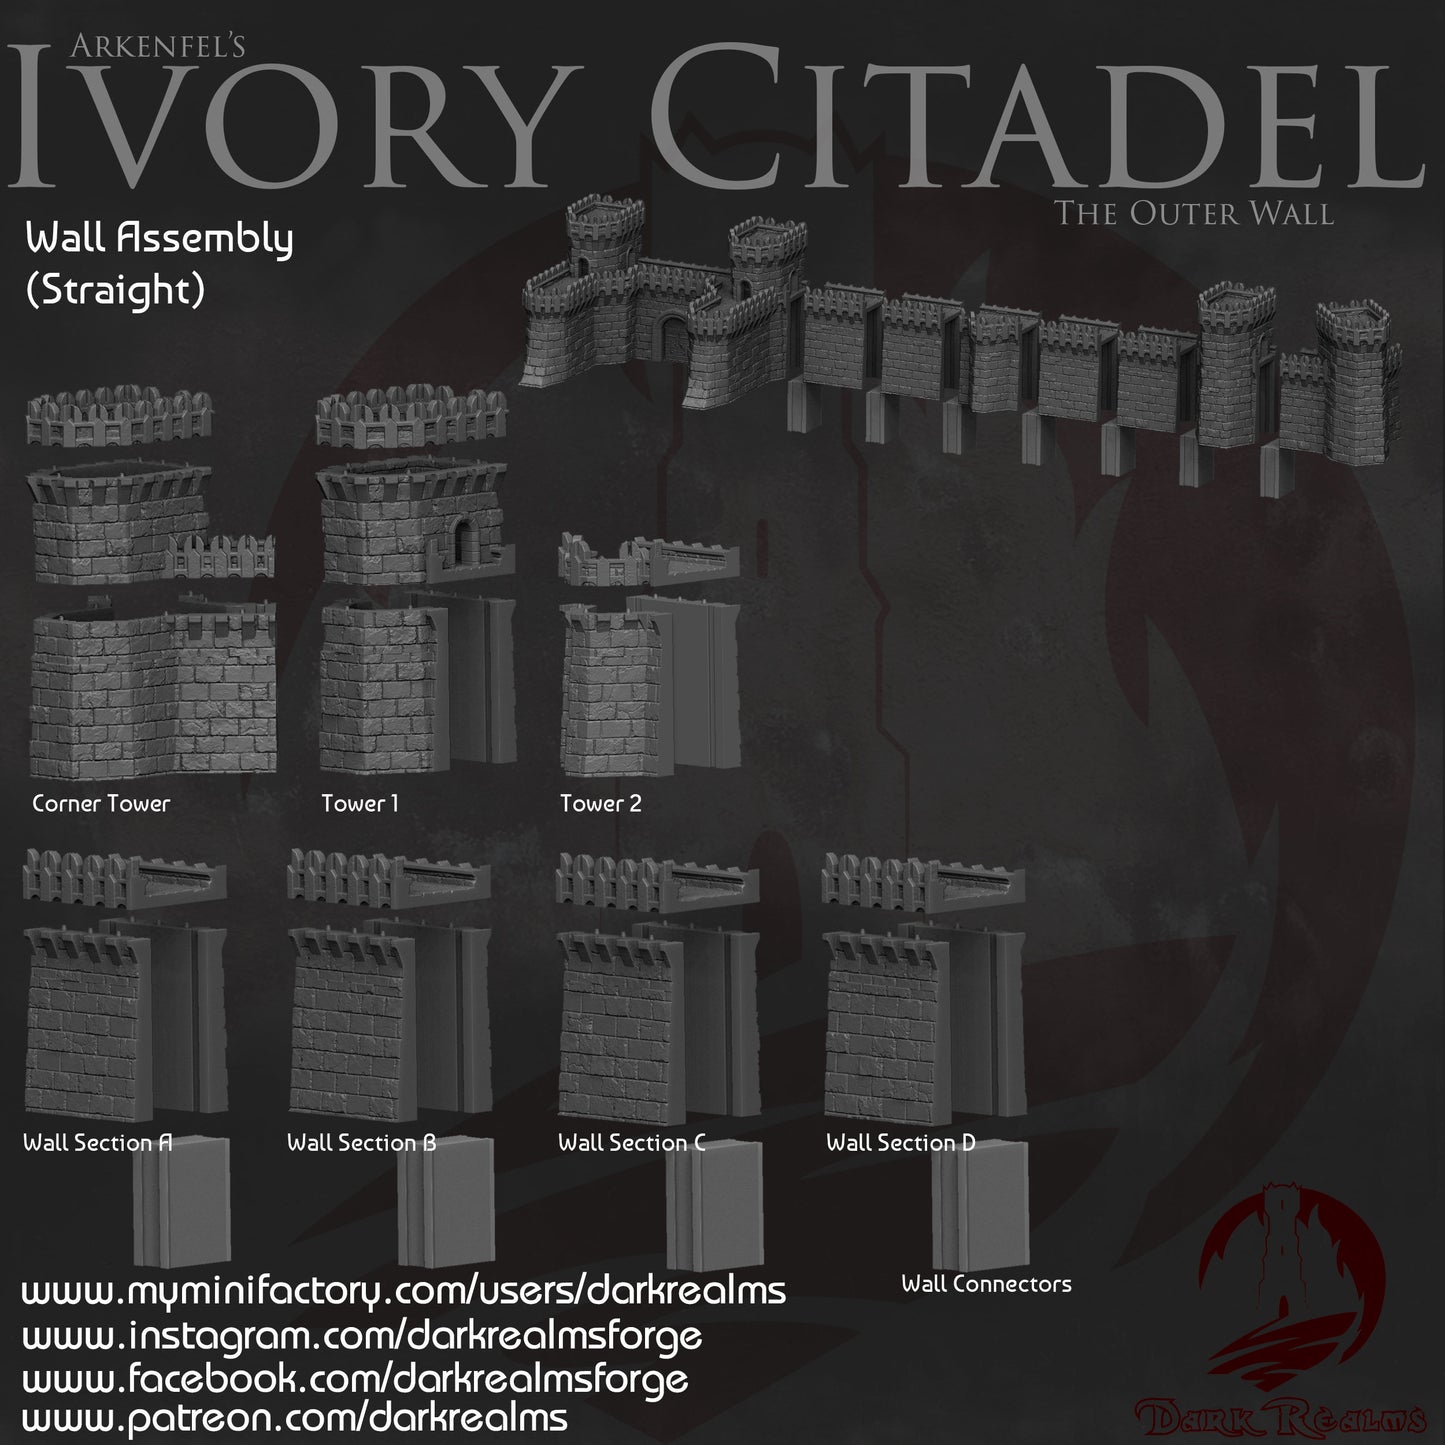 Ruins, Arkenfel, medieval, Dungeons and Dragons, warhammer, City, Osgiliath, lotr, Gondor, Lord of the rings, house 2,city building, Minas Tirith, citadel, walls, wall system, outer wall, arkenfel wall, gondor wall, minas tirith wall, wall set